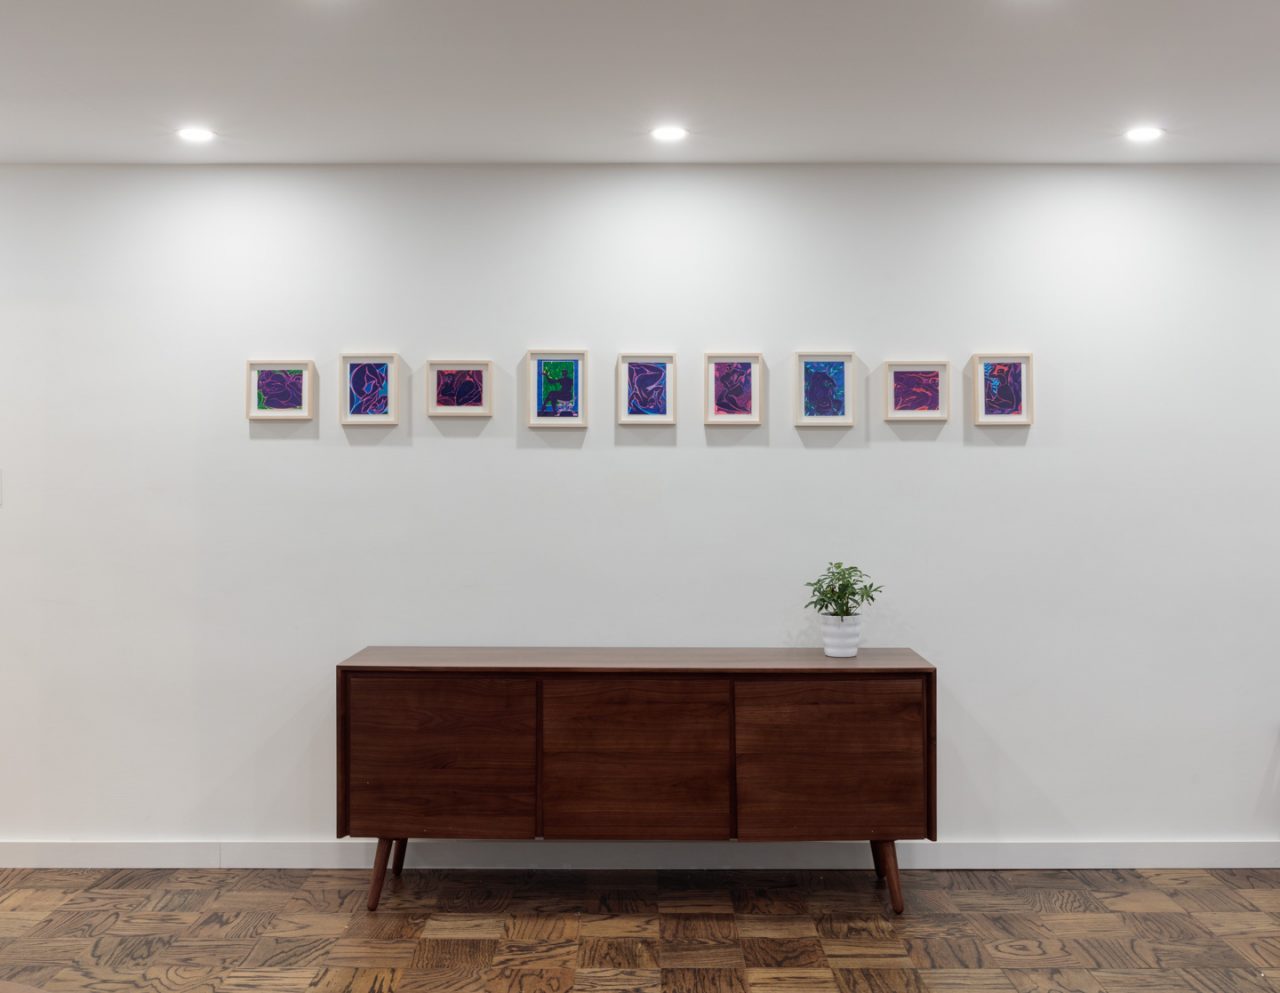 Works on Paper | Installation view, Works on Paper, 2018